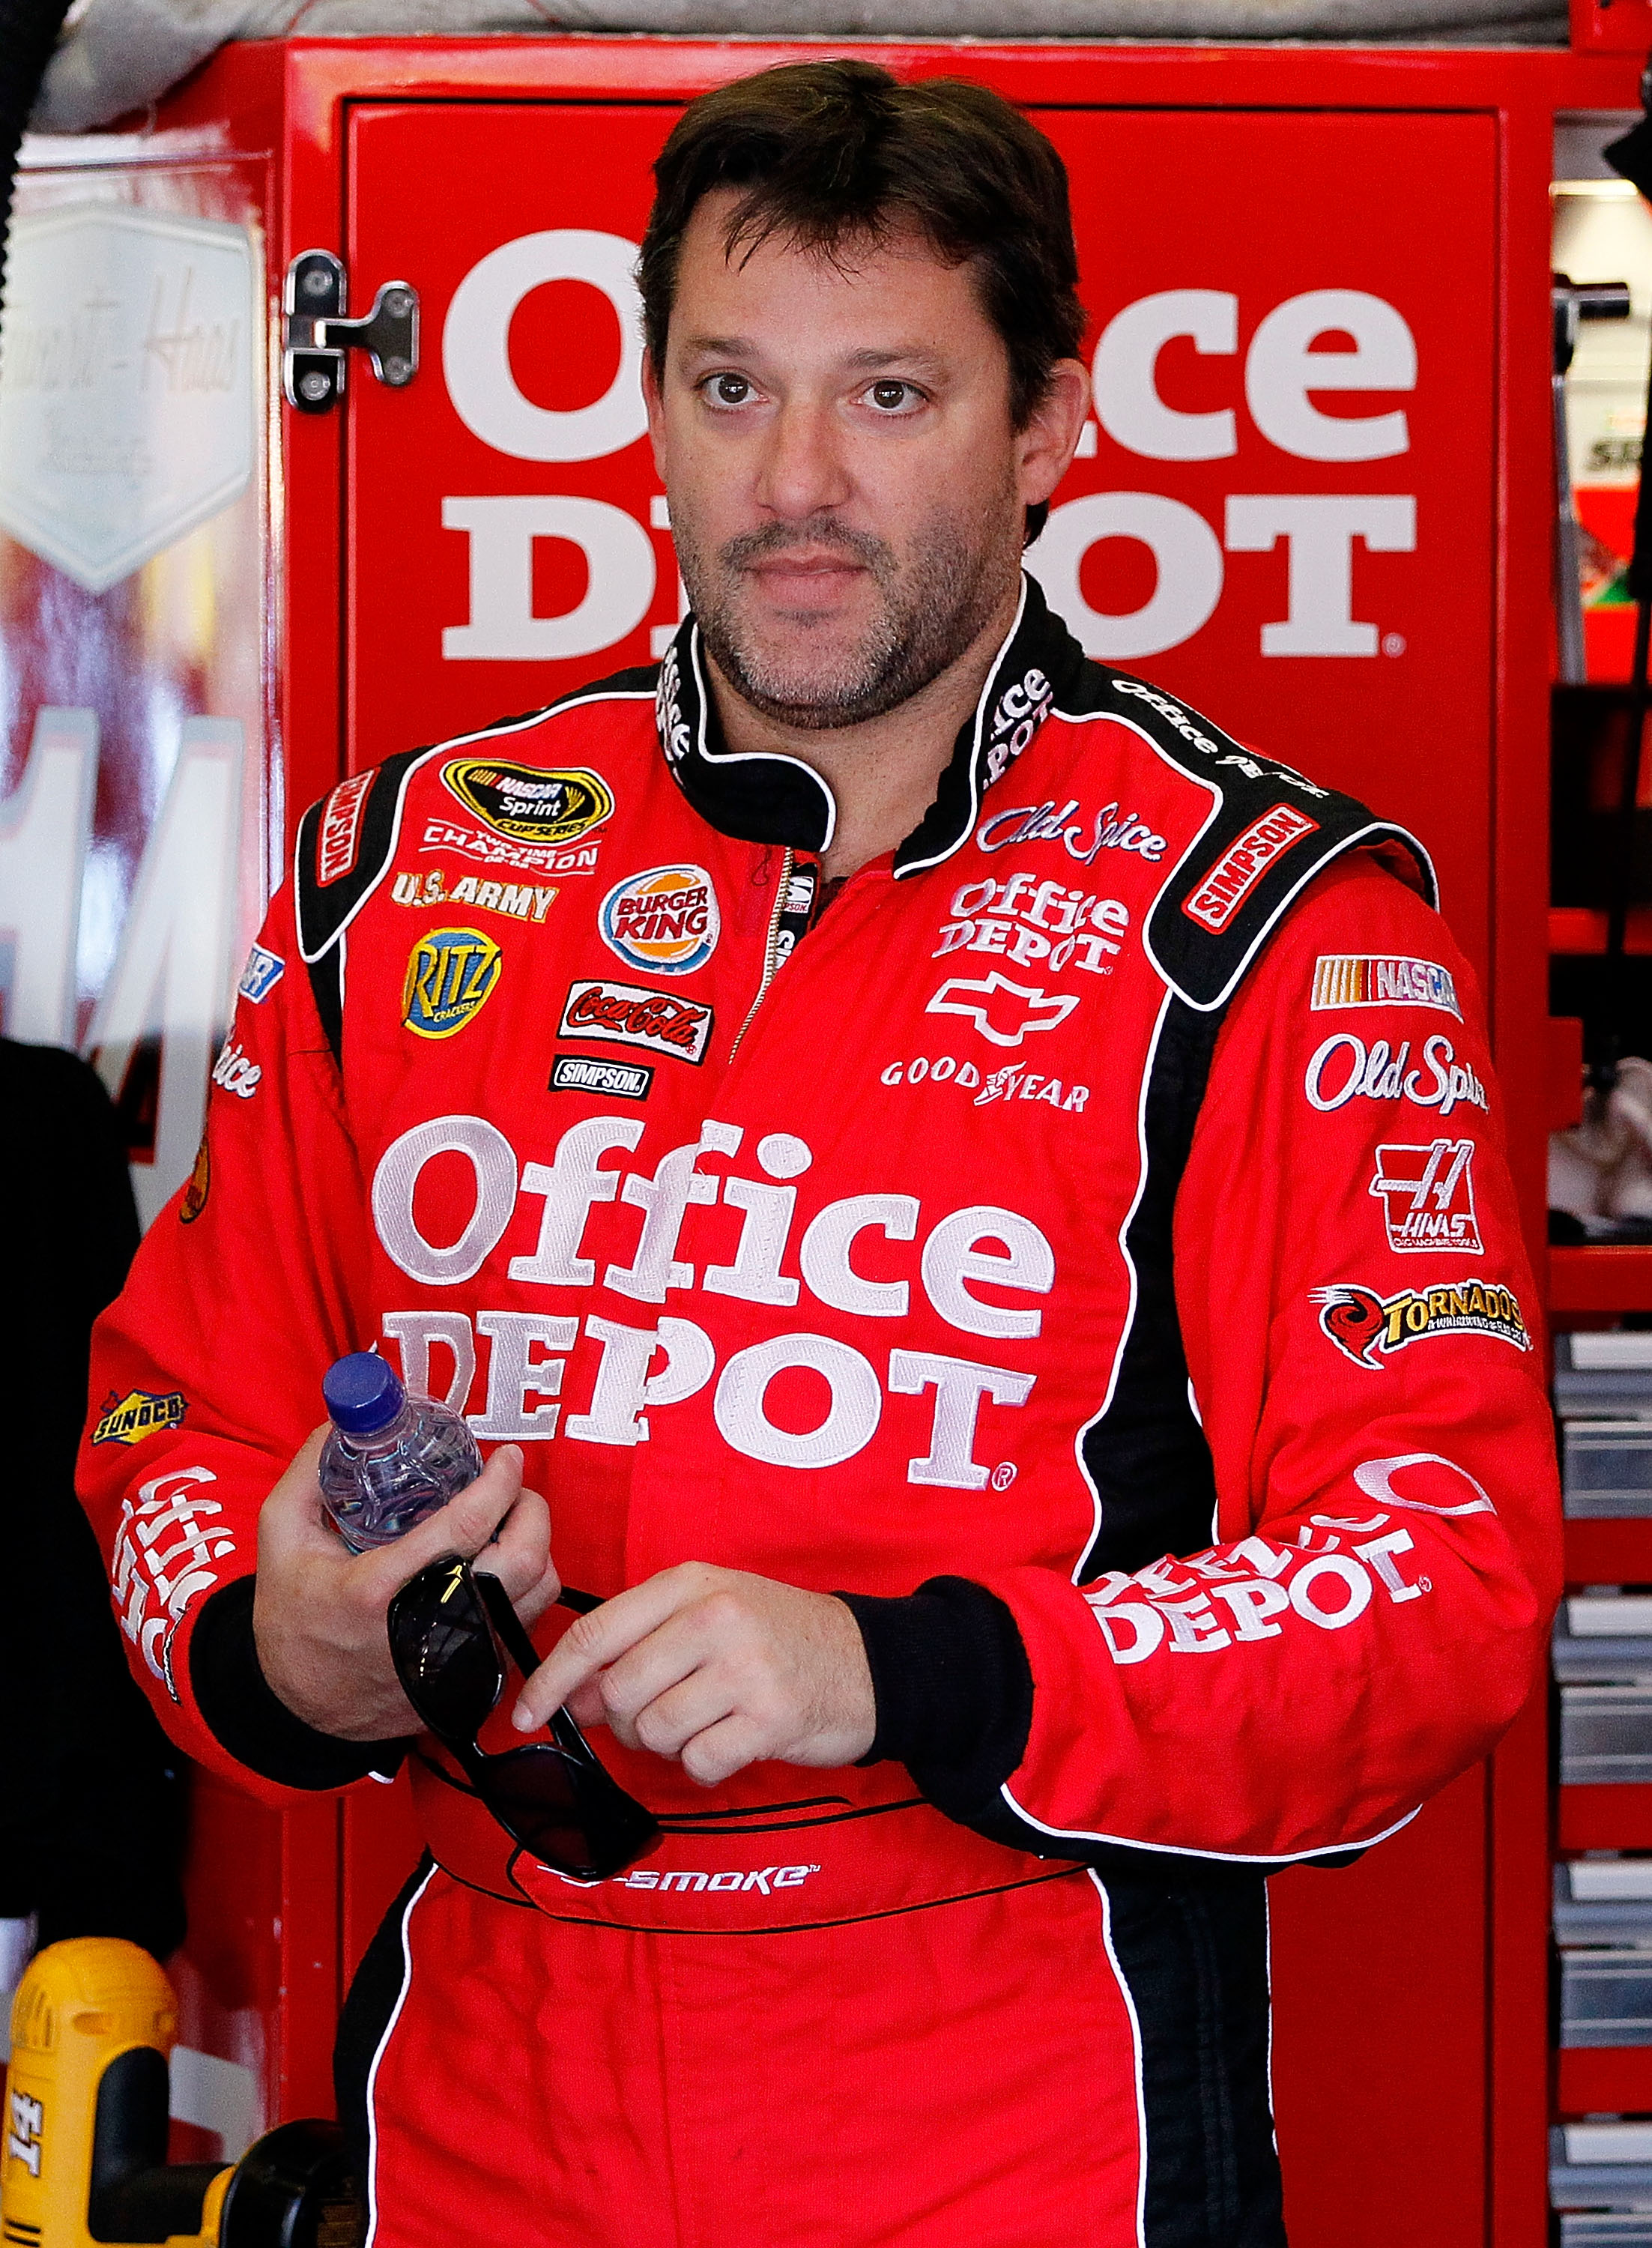 TALLADEGA, AL - OCTOBER 29:  Tony Stewart, driver of the #14 Old Spice/Office Depot Chevrolet, stands in the garage during practice for the NASCAR Sprint Cup Series AMP Energy Juice 500 at Talladega Superspeedway on October 29, 2010 in Talladega, Alabama.